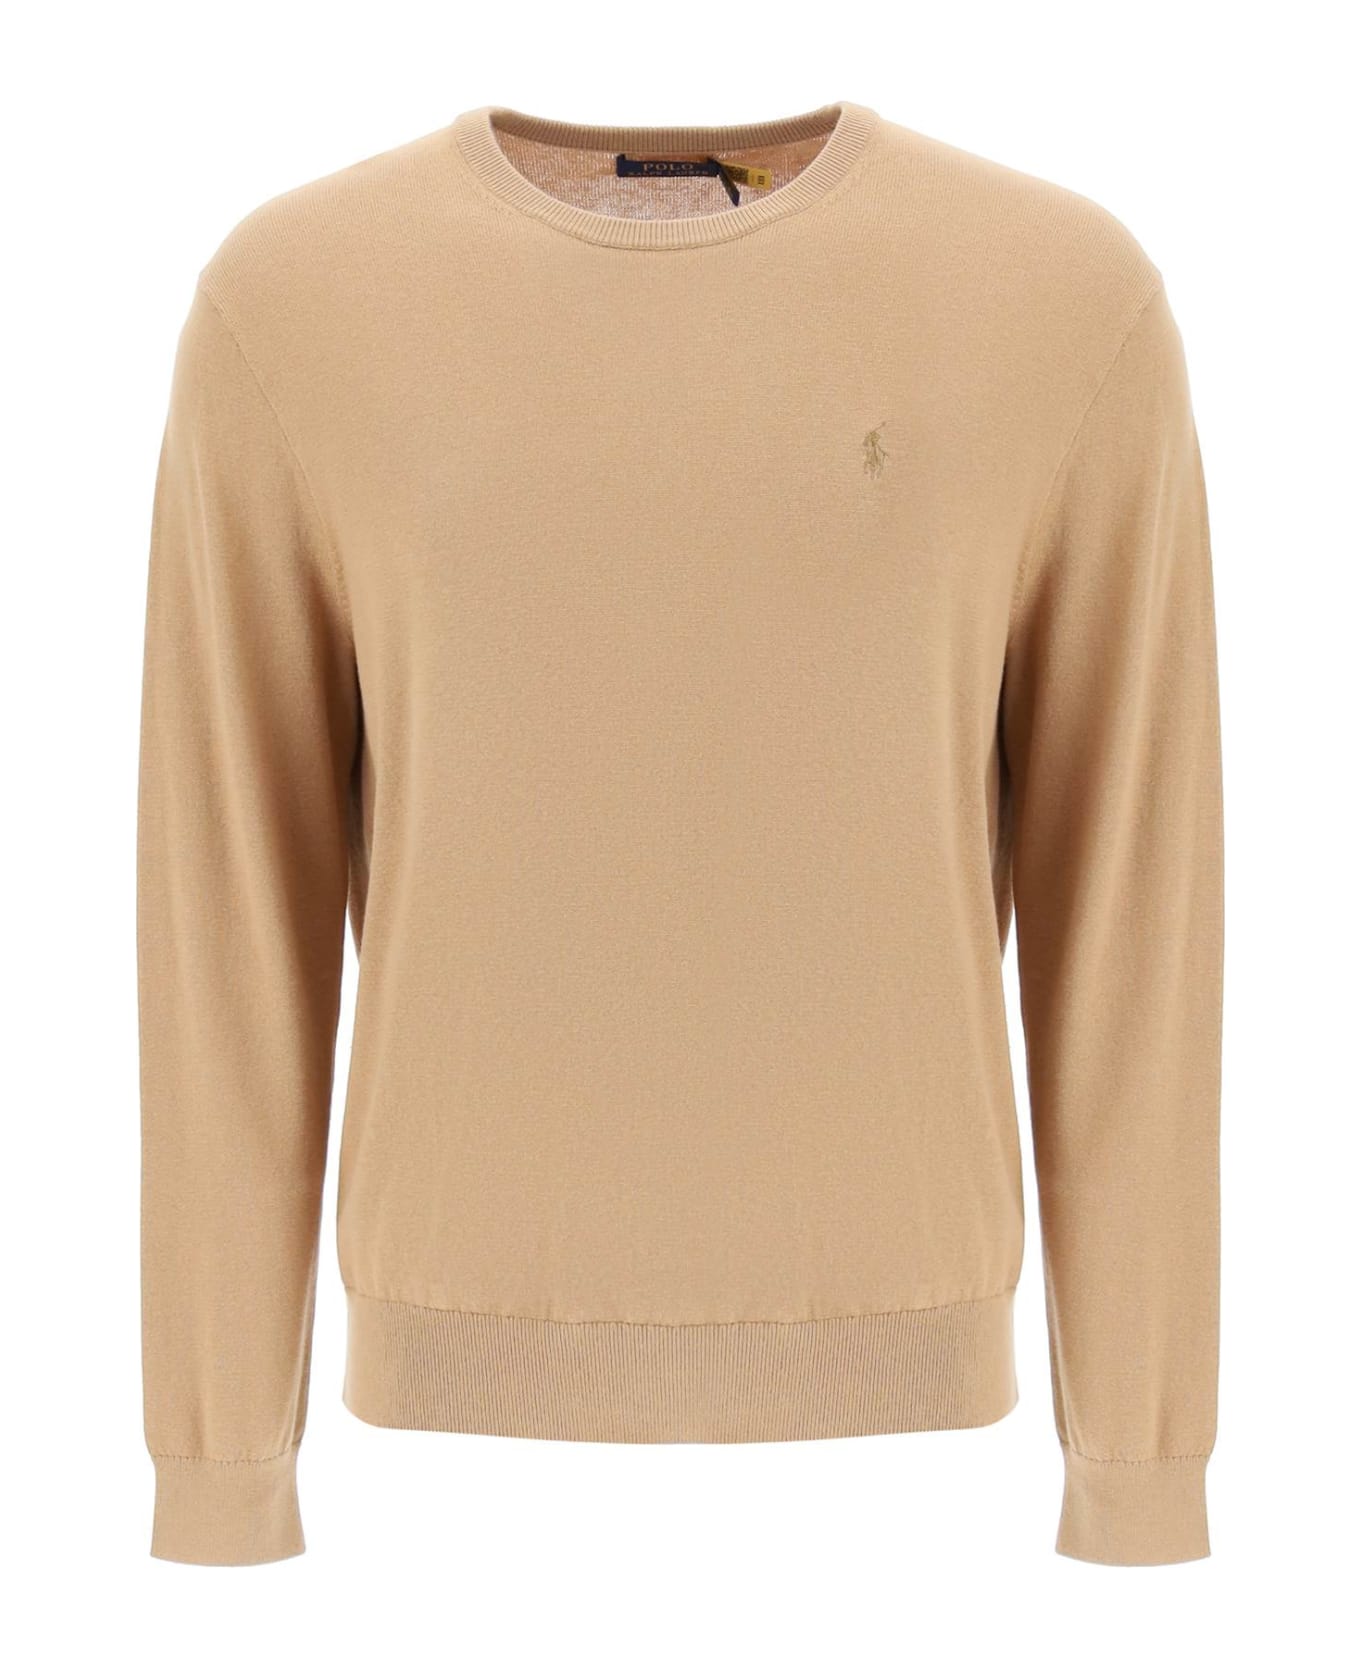 Polo Ralph Lauren Sweater In Cotton And Cashmere - BURLAP TAN (Beige) ニットウェア